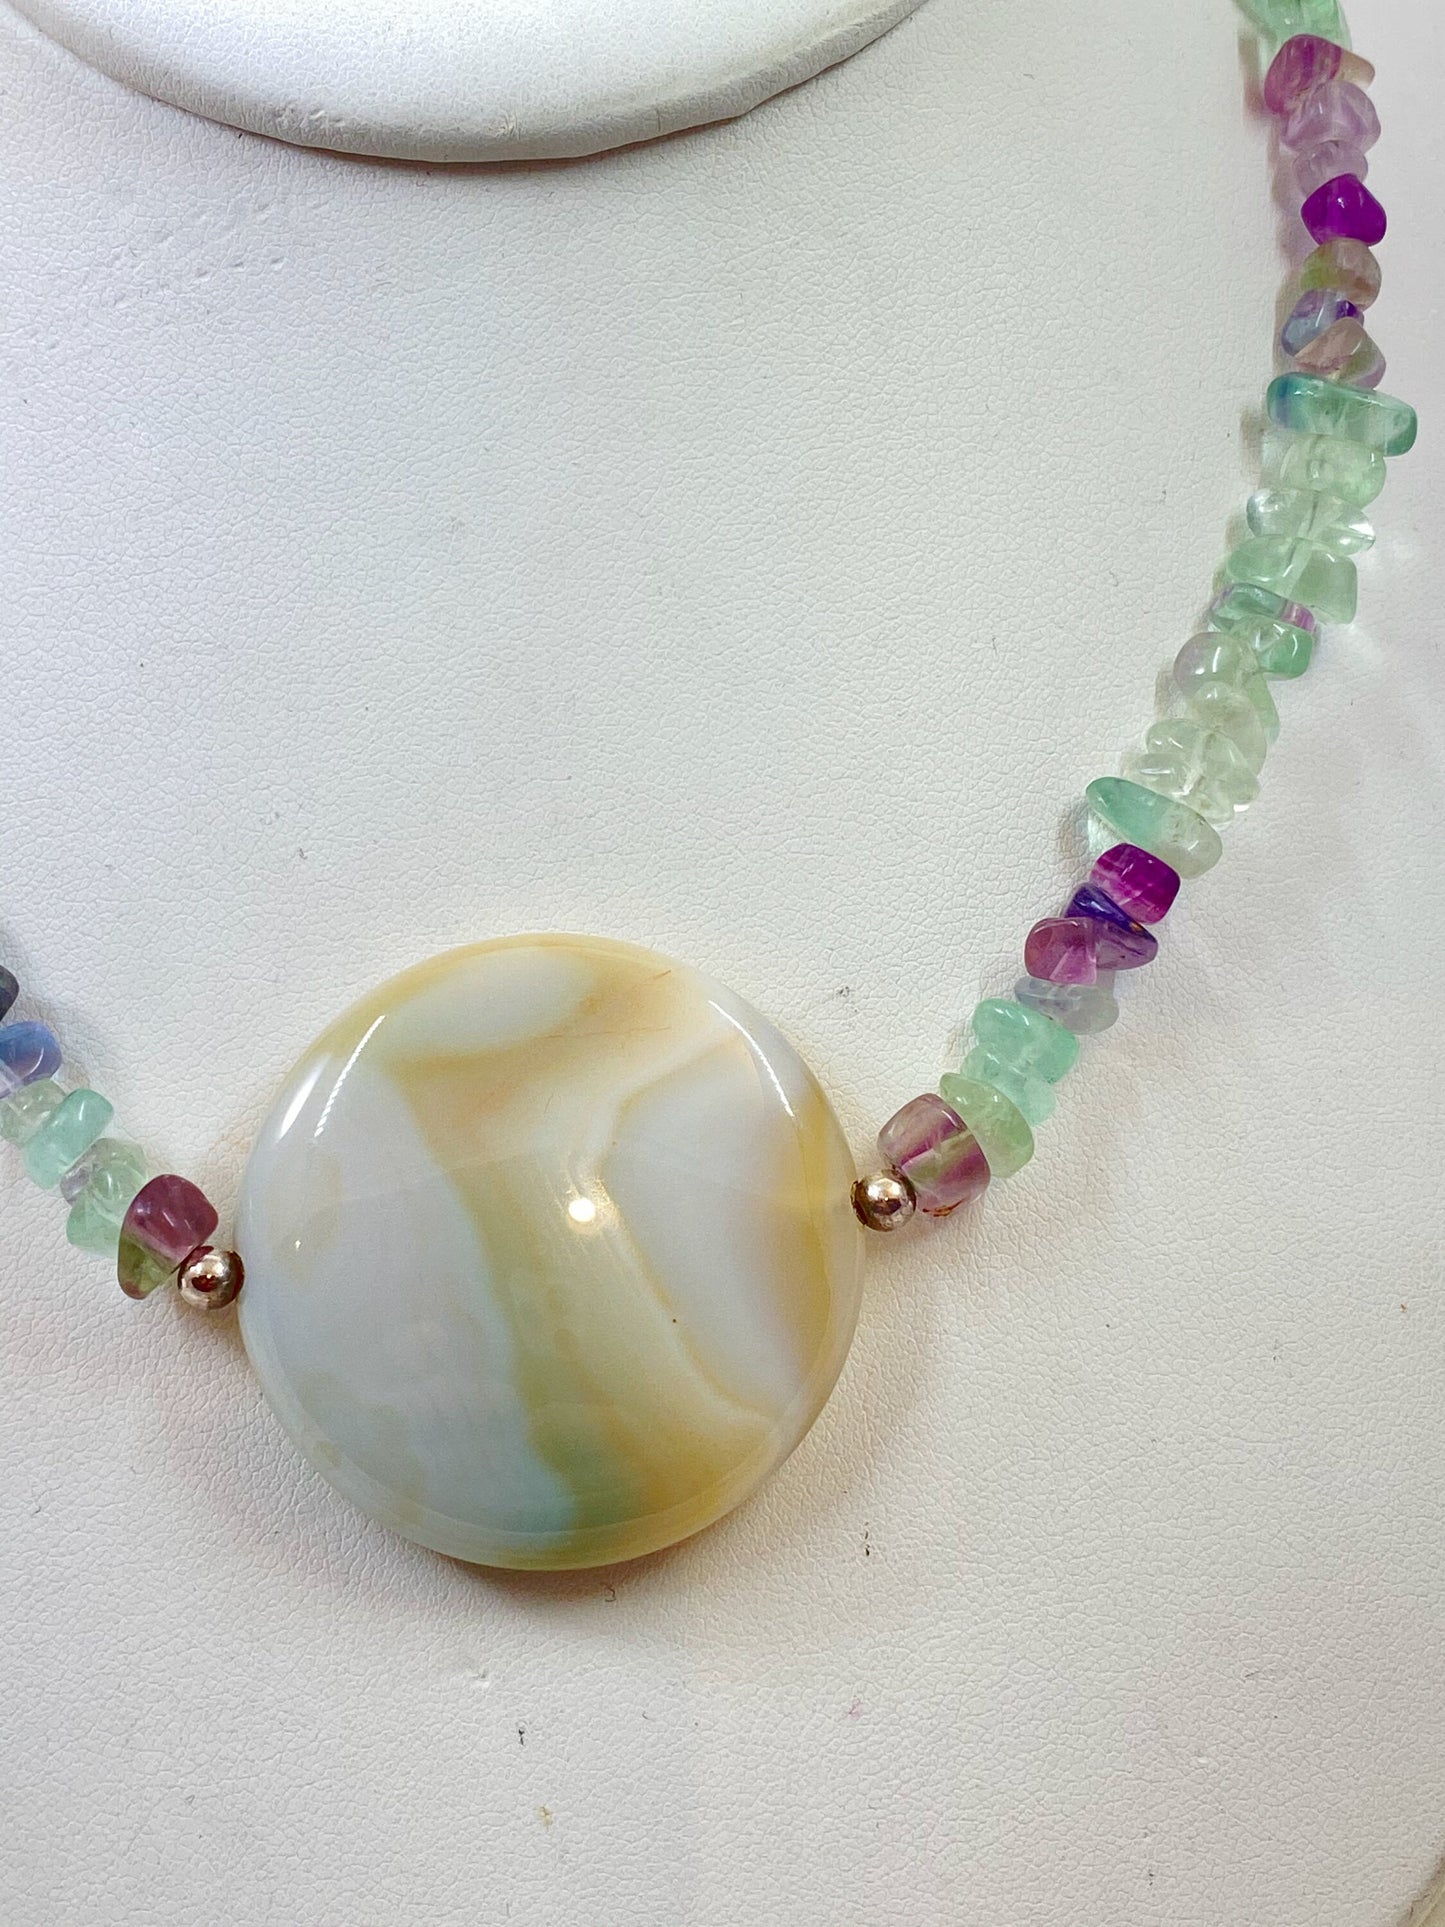 Fluorite and Amazonite beaded necklace. Measures 17" long and is finished with a quality sterling silver toggle clasp.